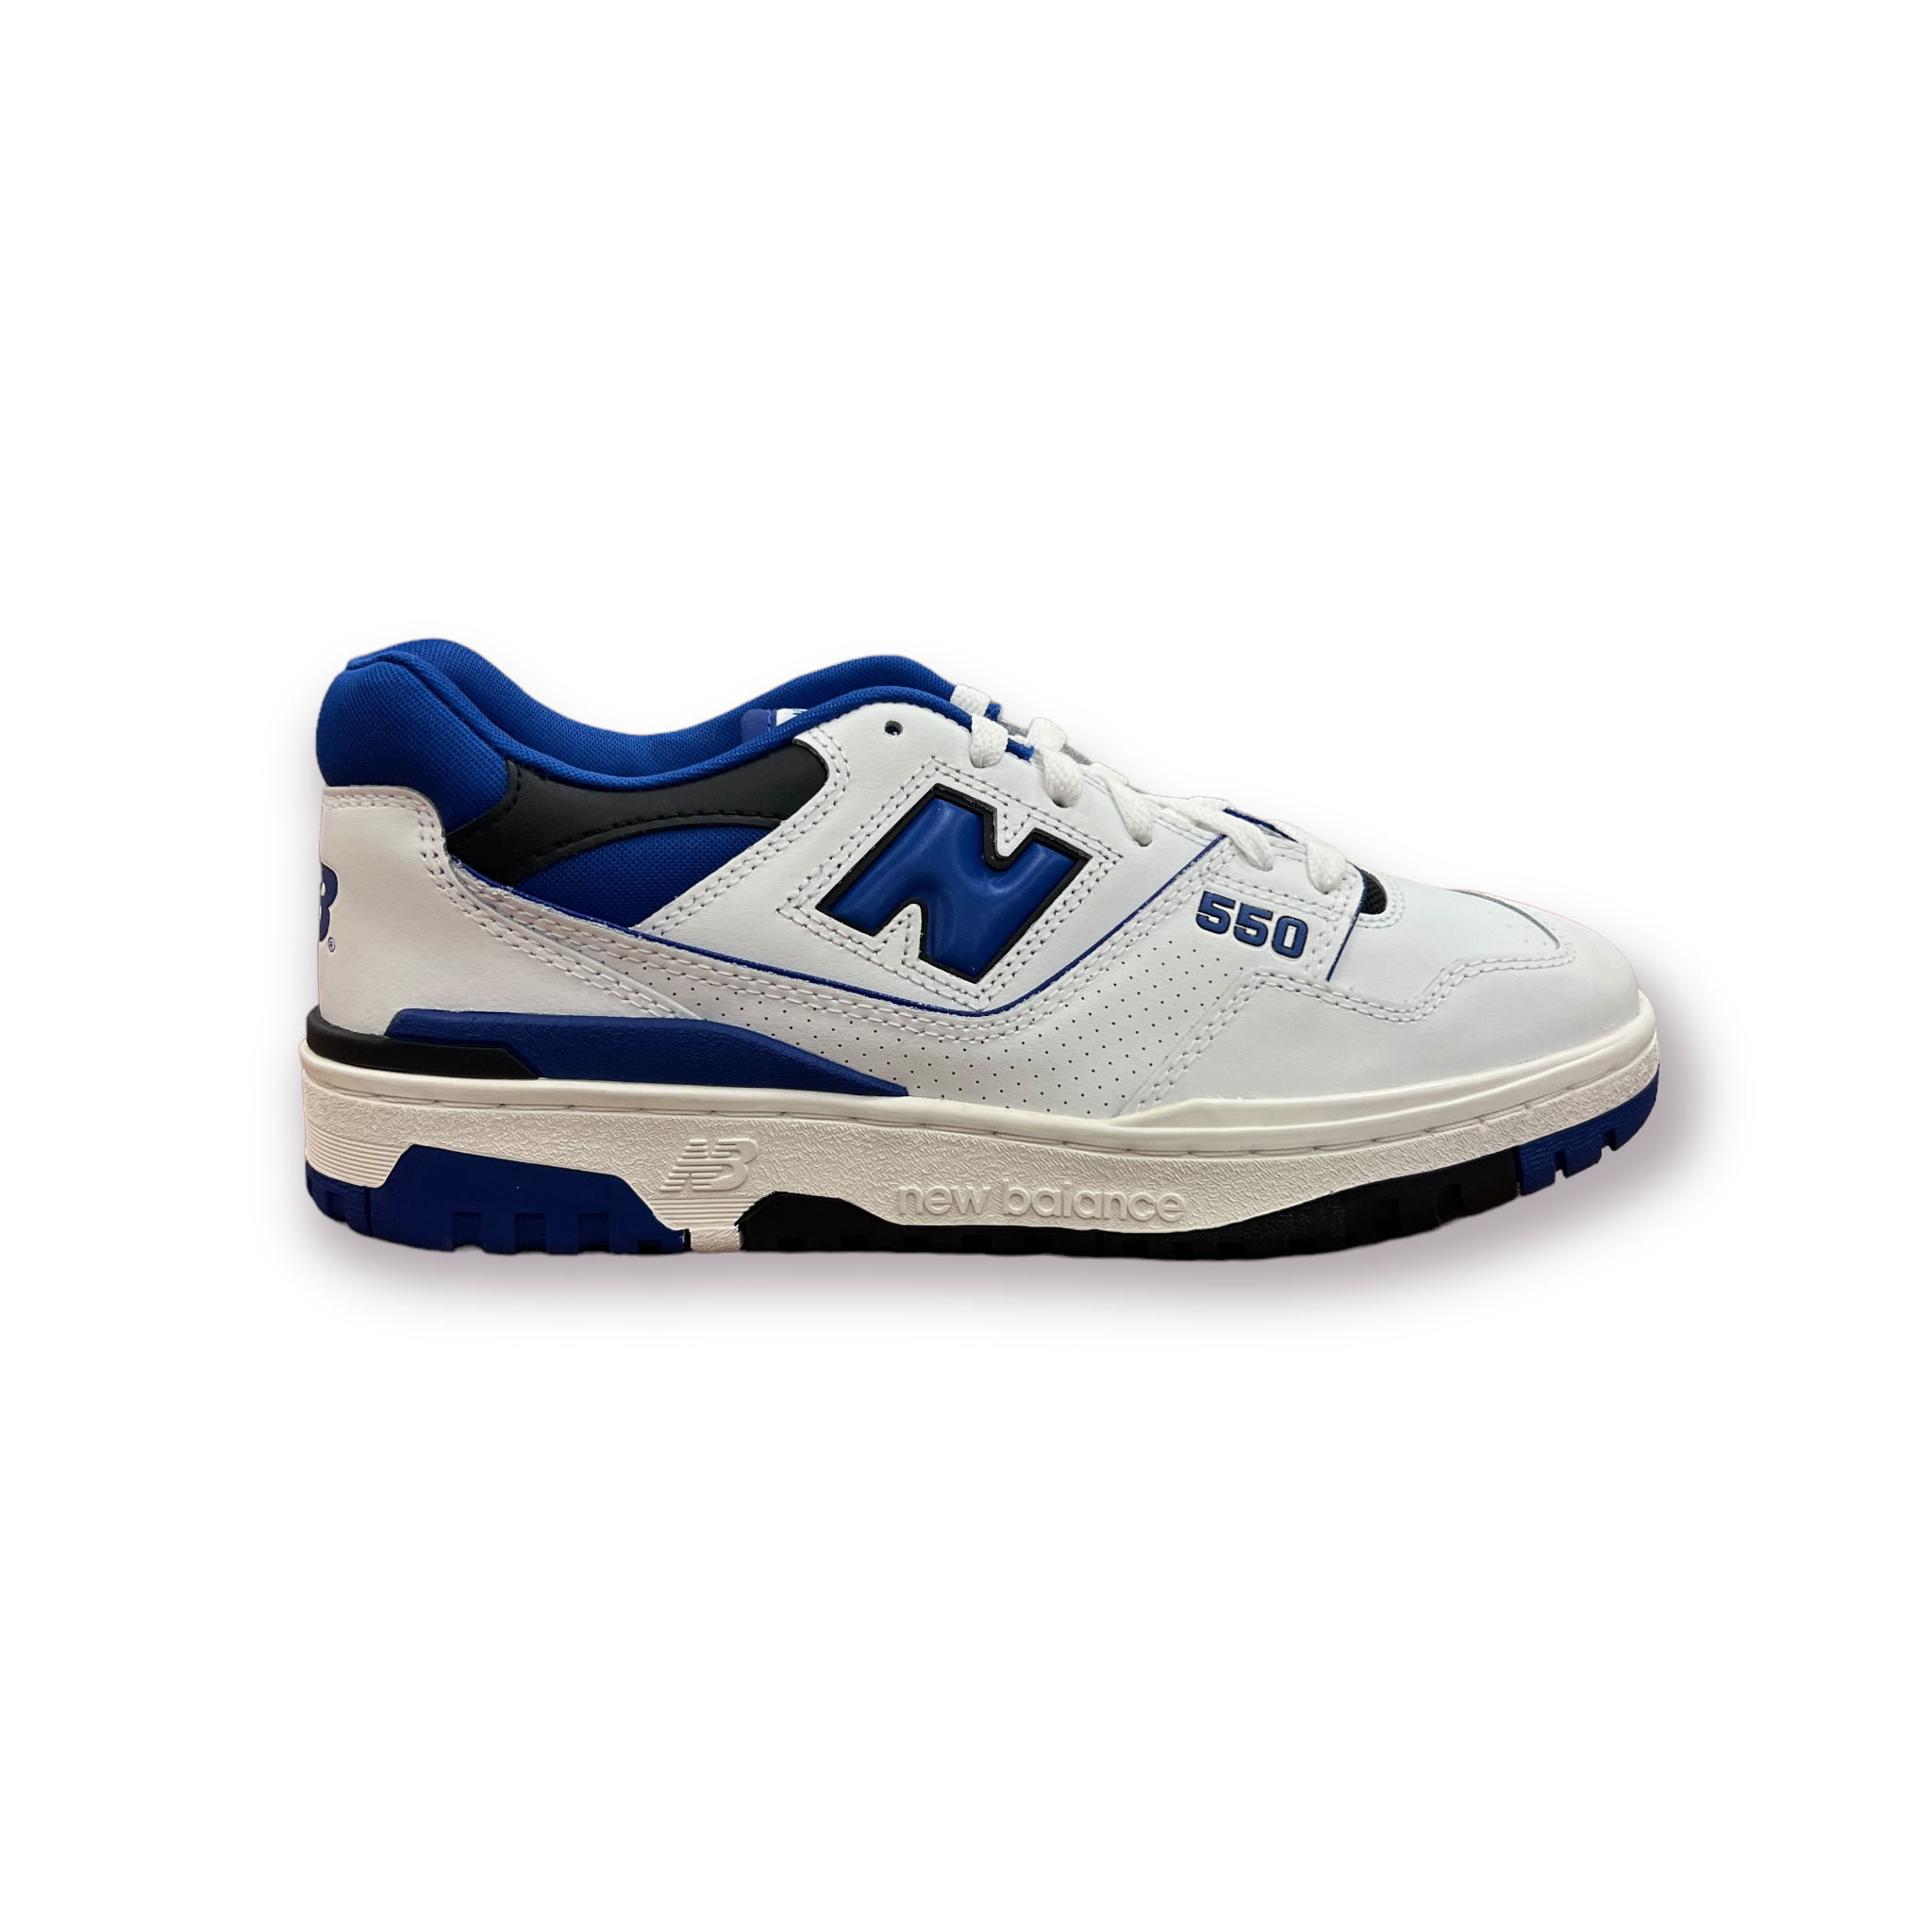 New Balance 550 White Blue – Get In Where You Fit In